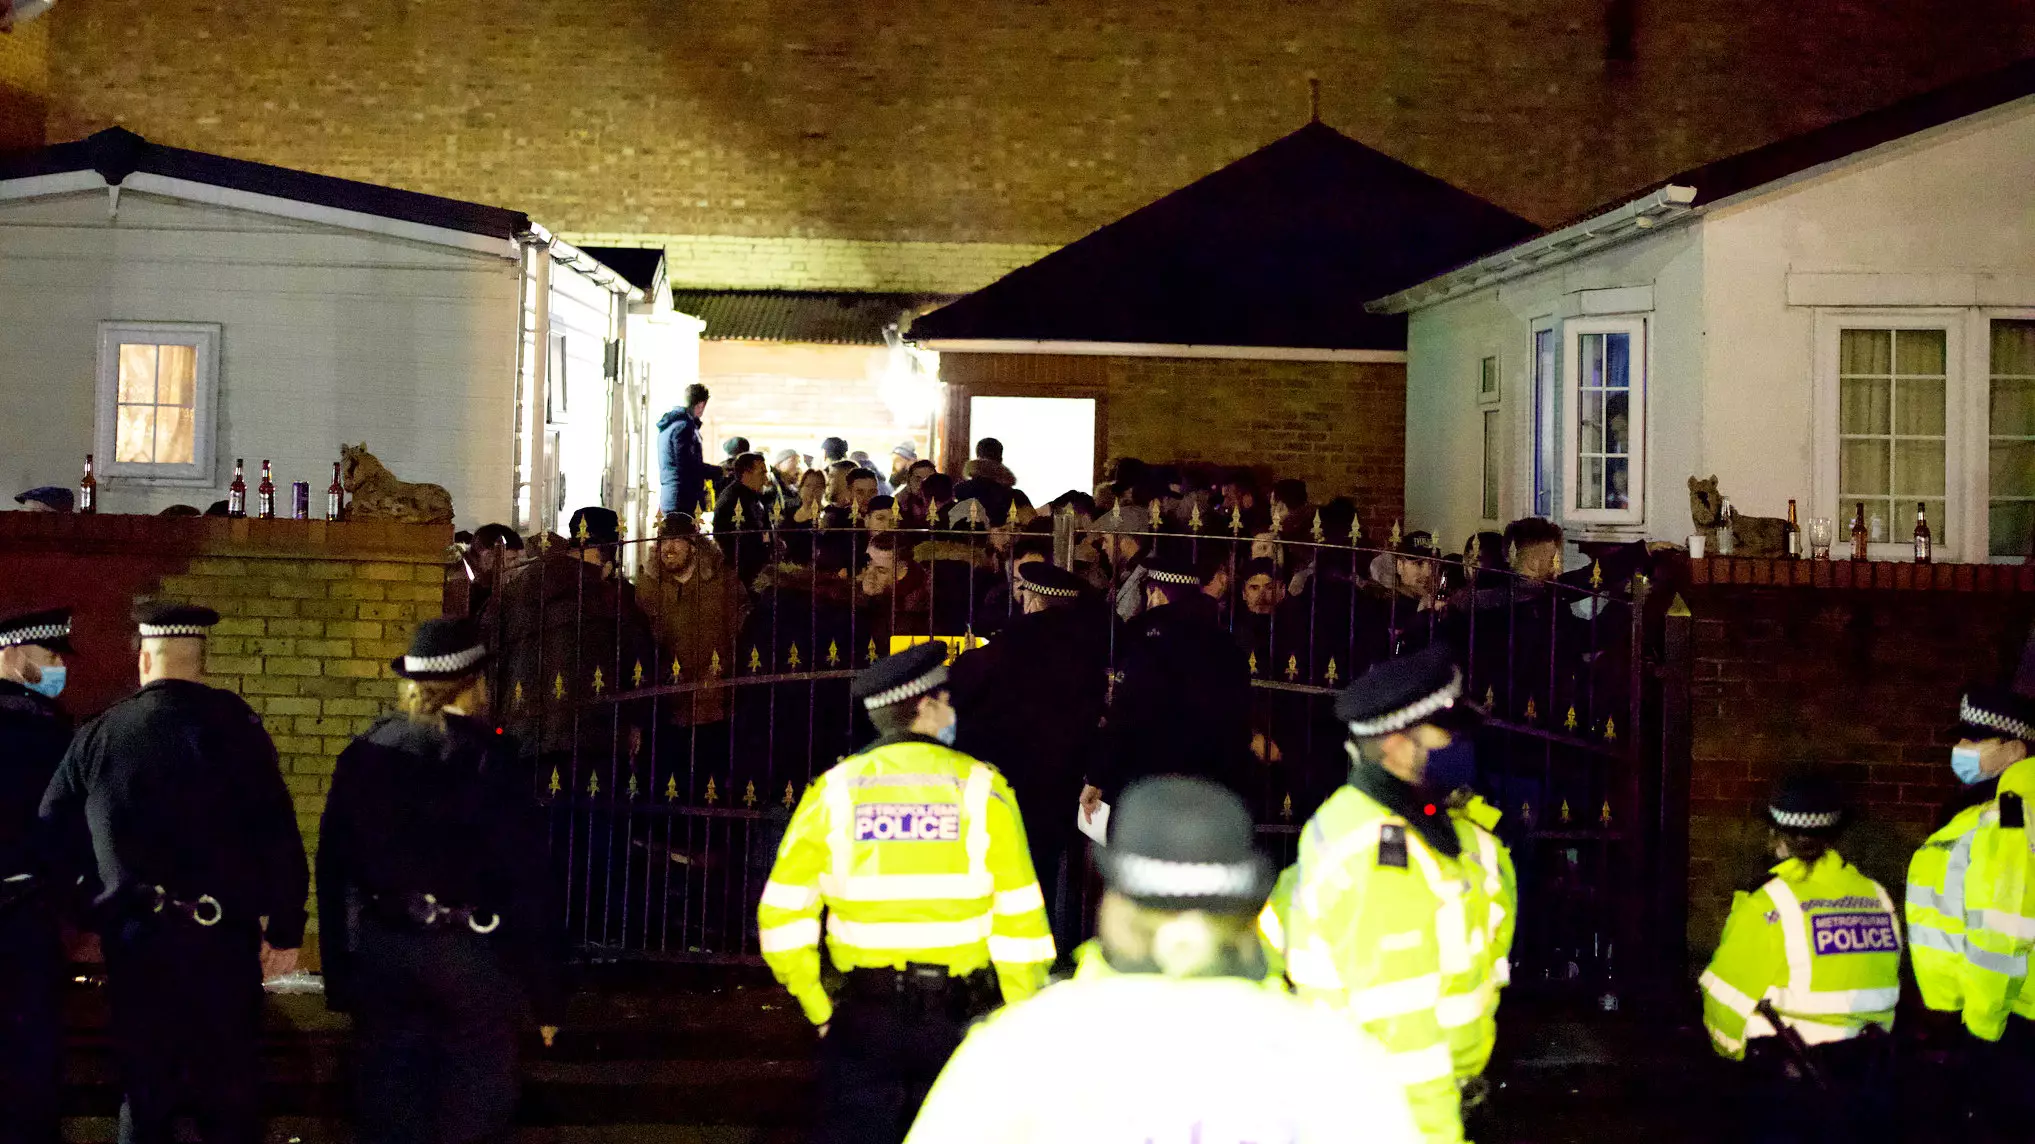 Police Officers Break Up 'Wake' Attended By '100 People' In London